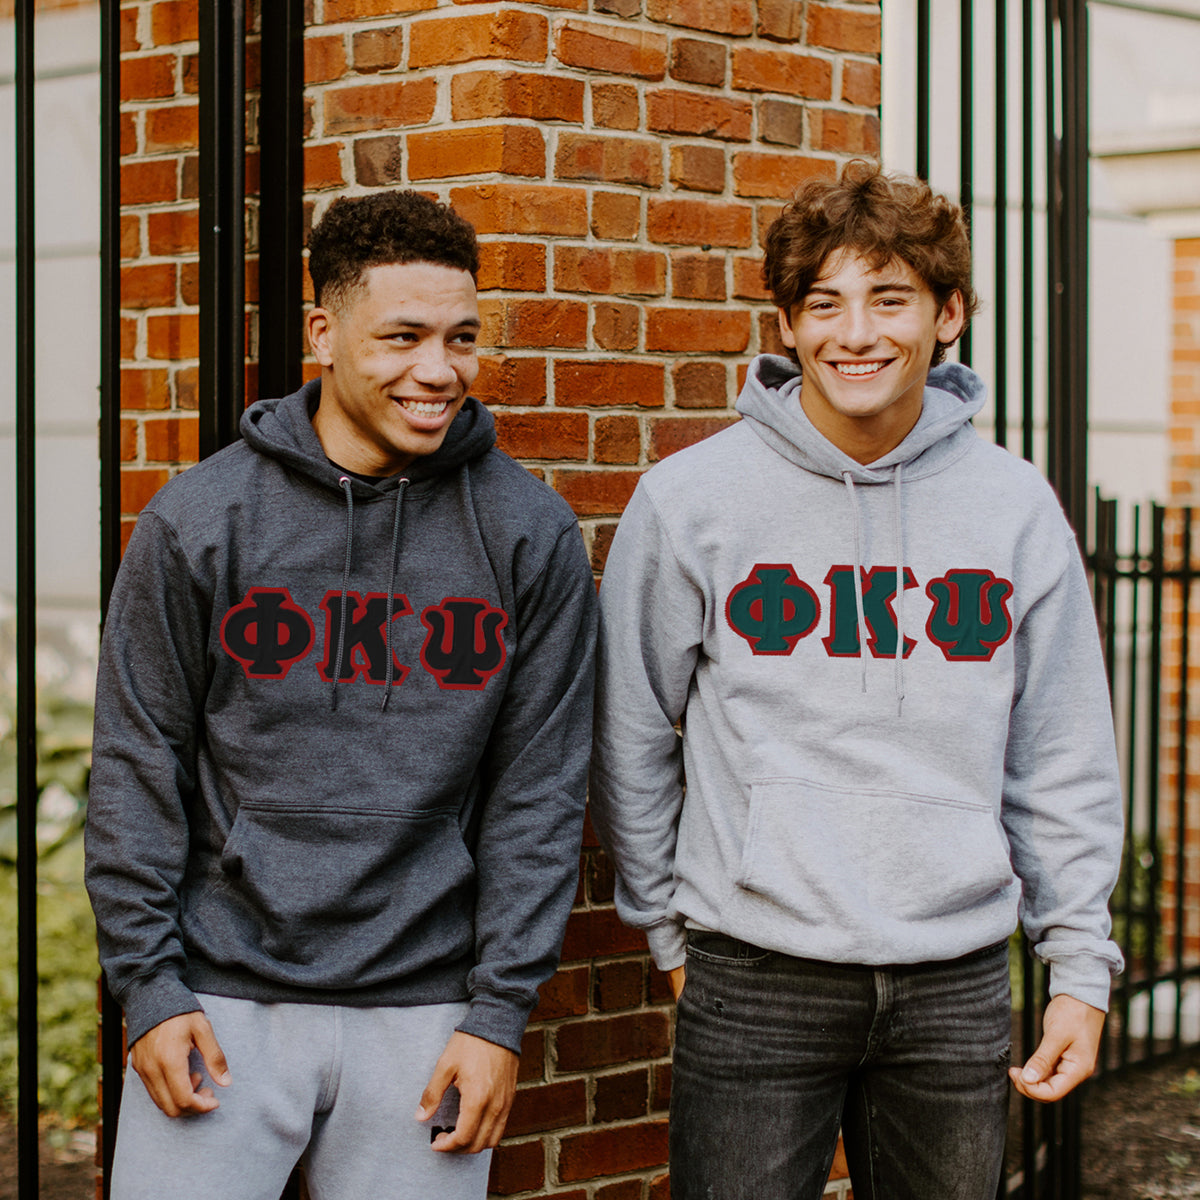 Phi Psi Heather Gray Hoodie with Sewn On Letters